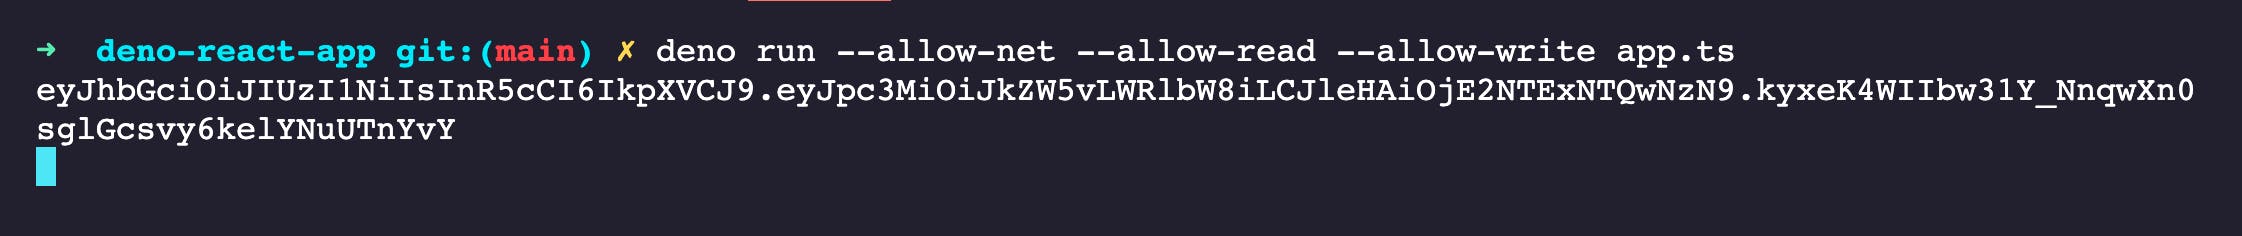 JWT token logged to console